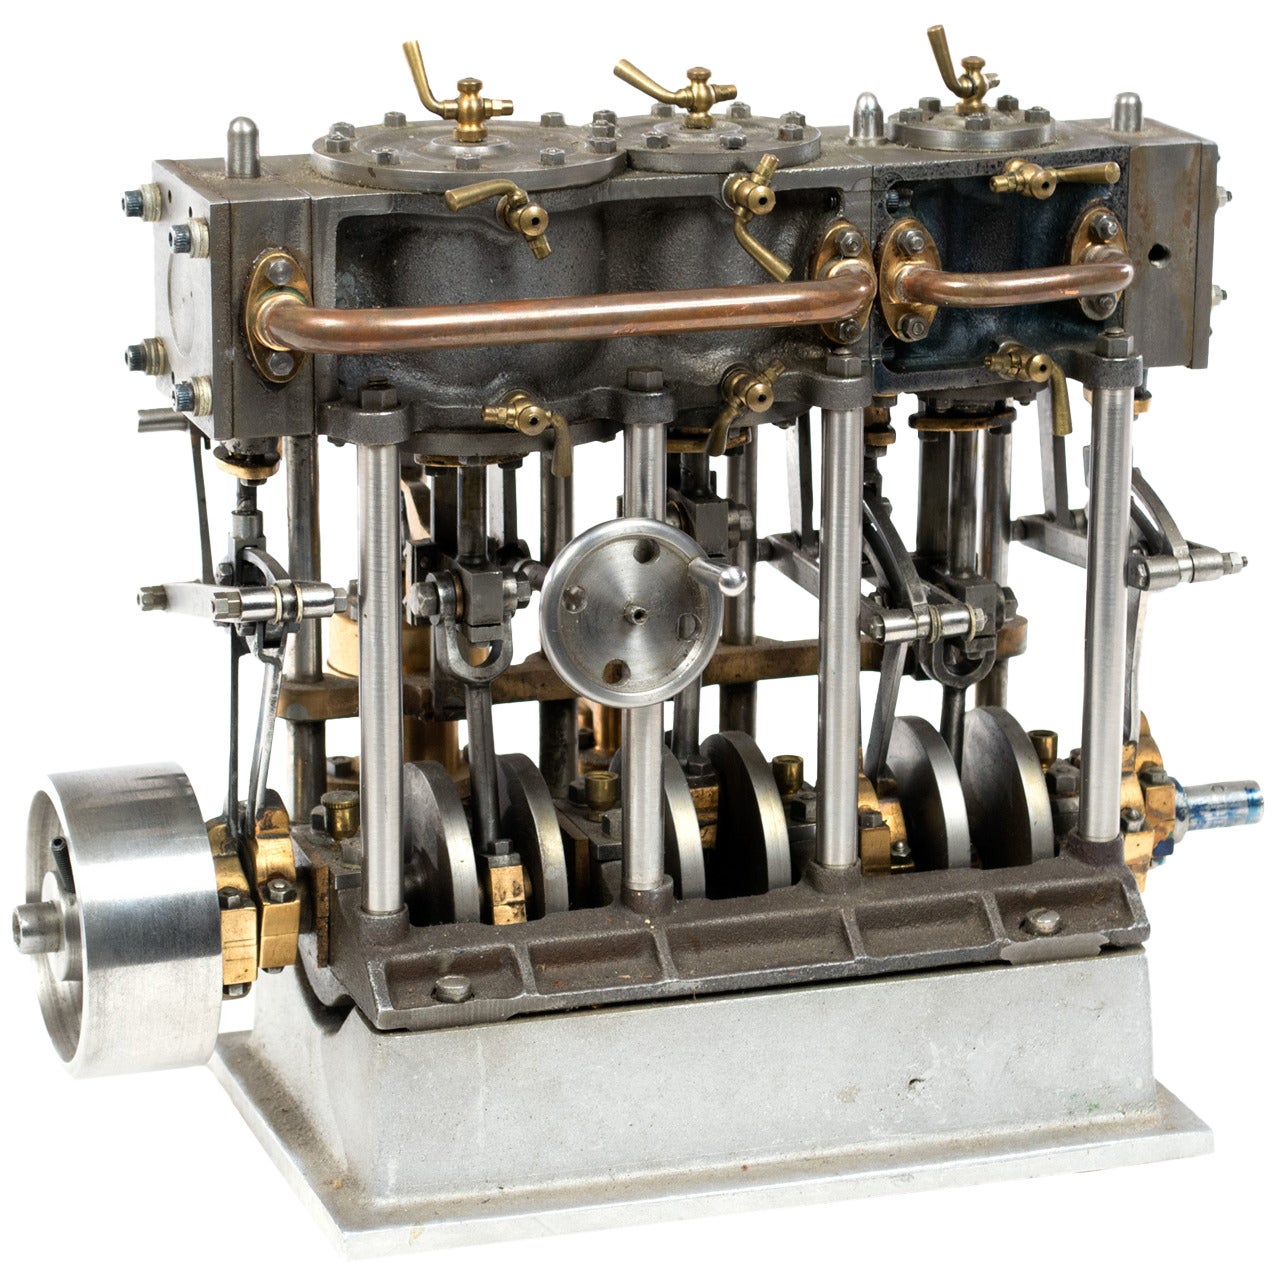 Live Steam Model of a Triple-Expansion Steam Engine